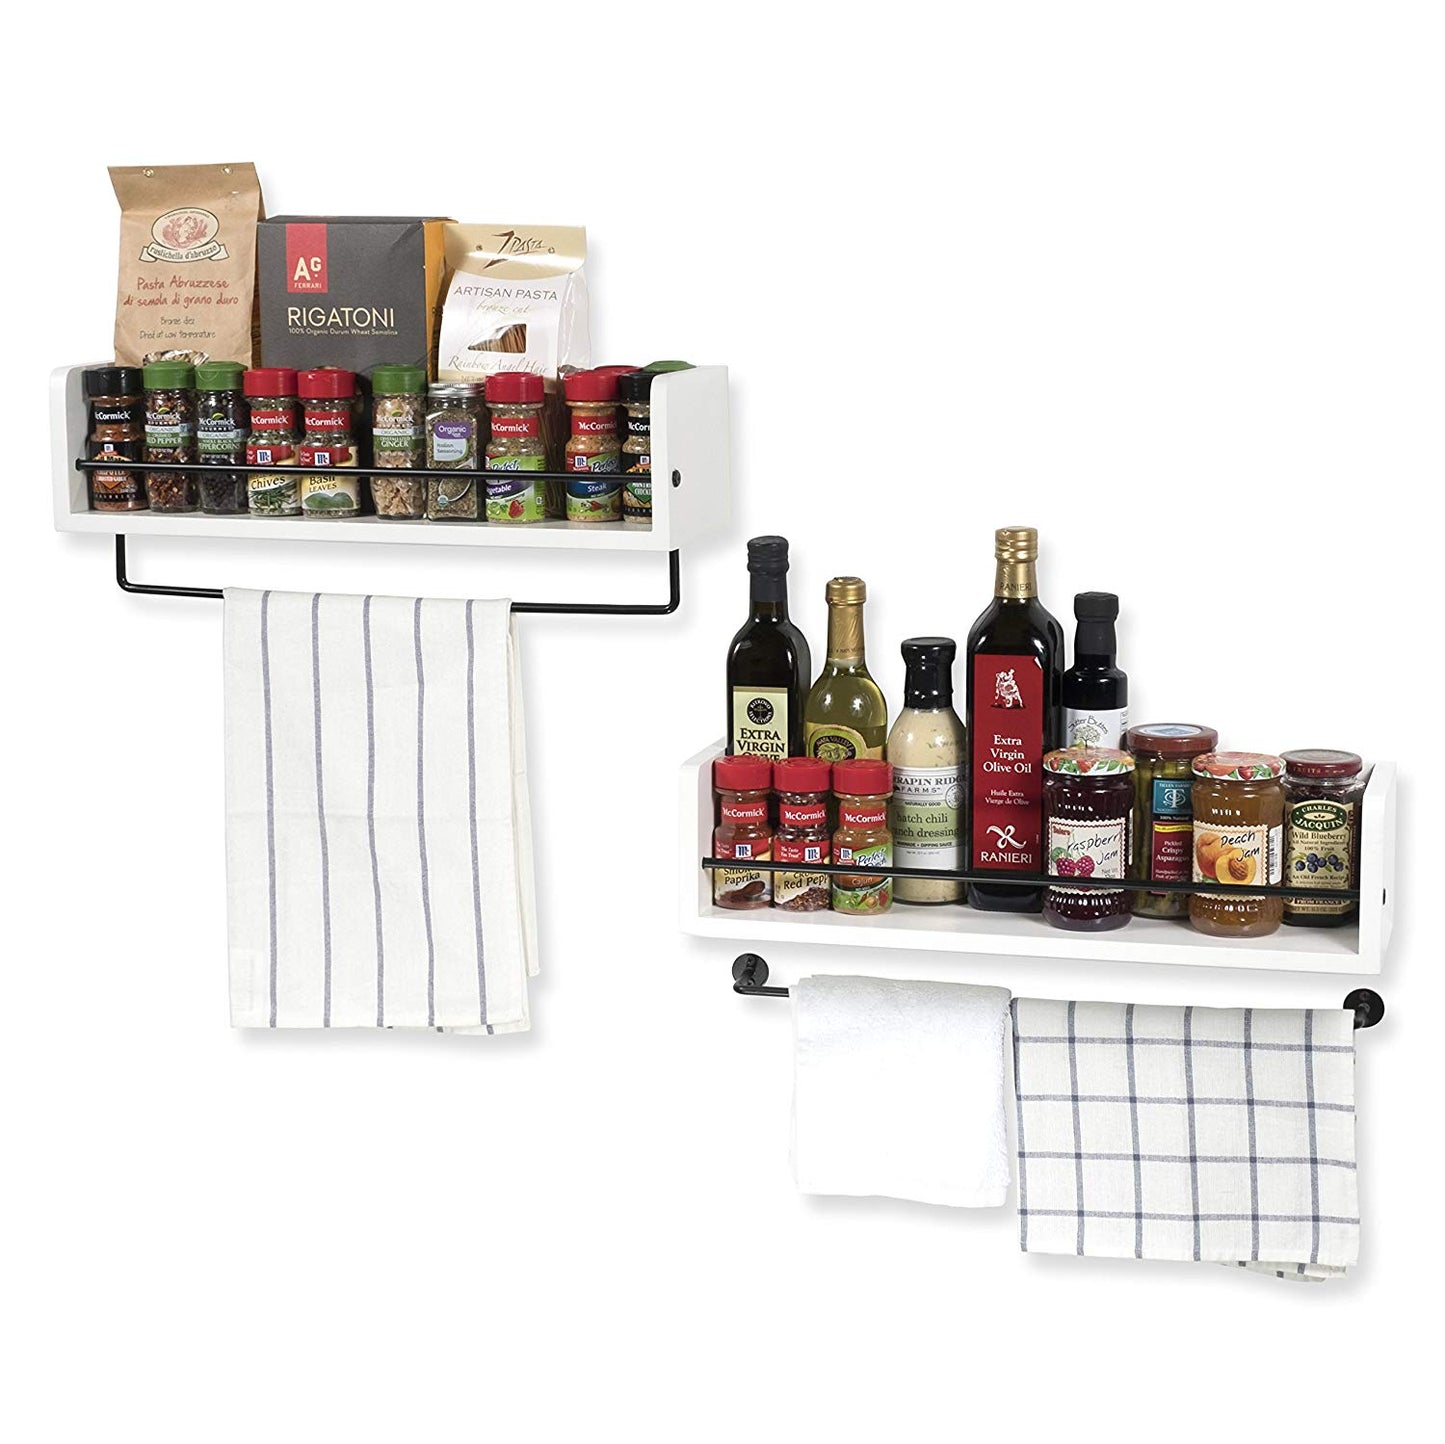 Rustic Kitchen Décor Spice Storage Rack with Towel Rail by ArtifactDesign Set of 2 White